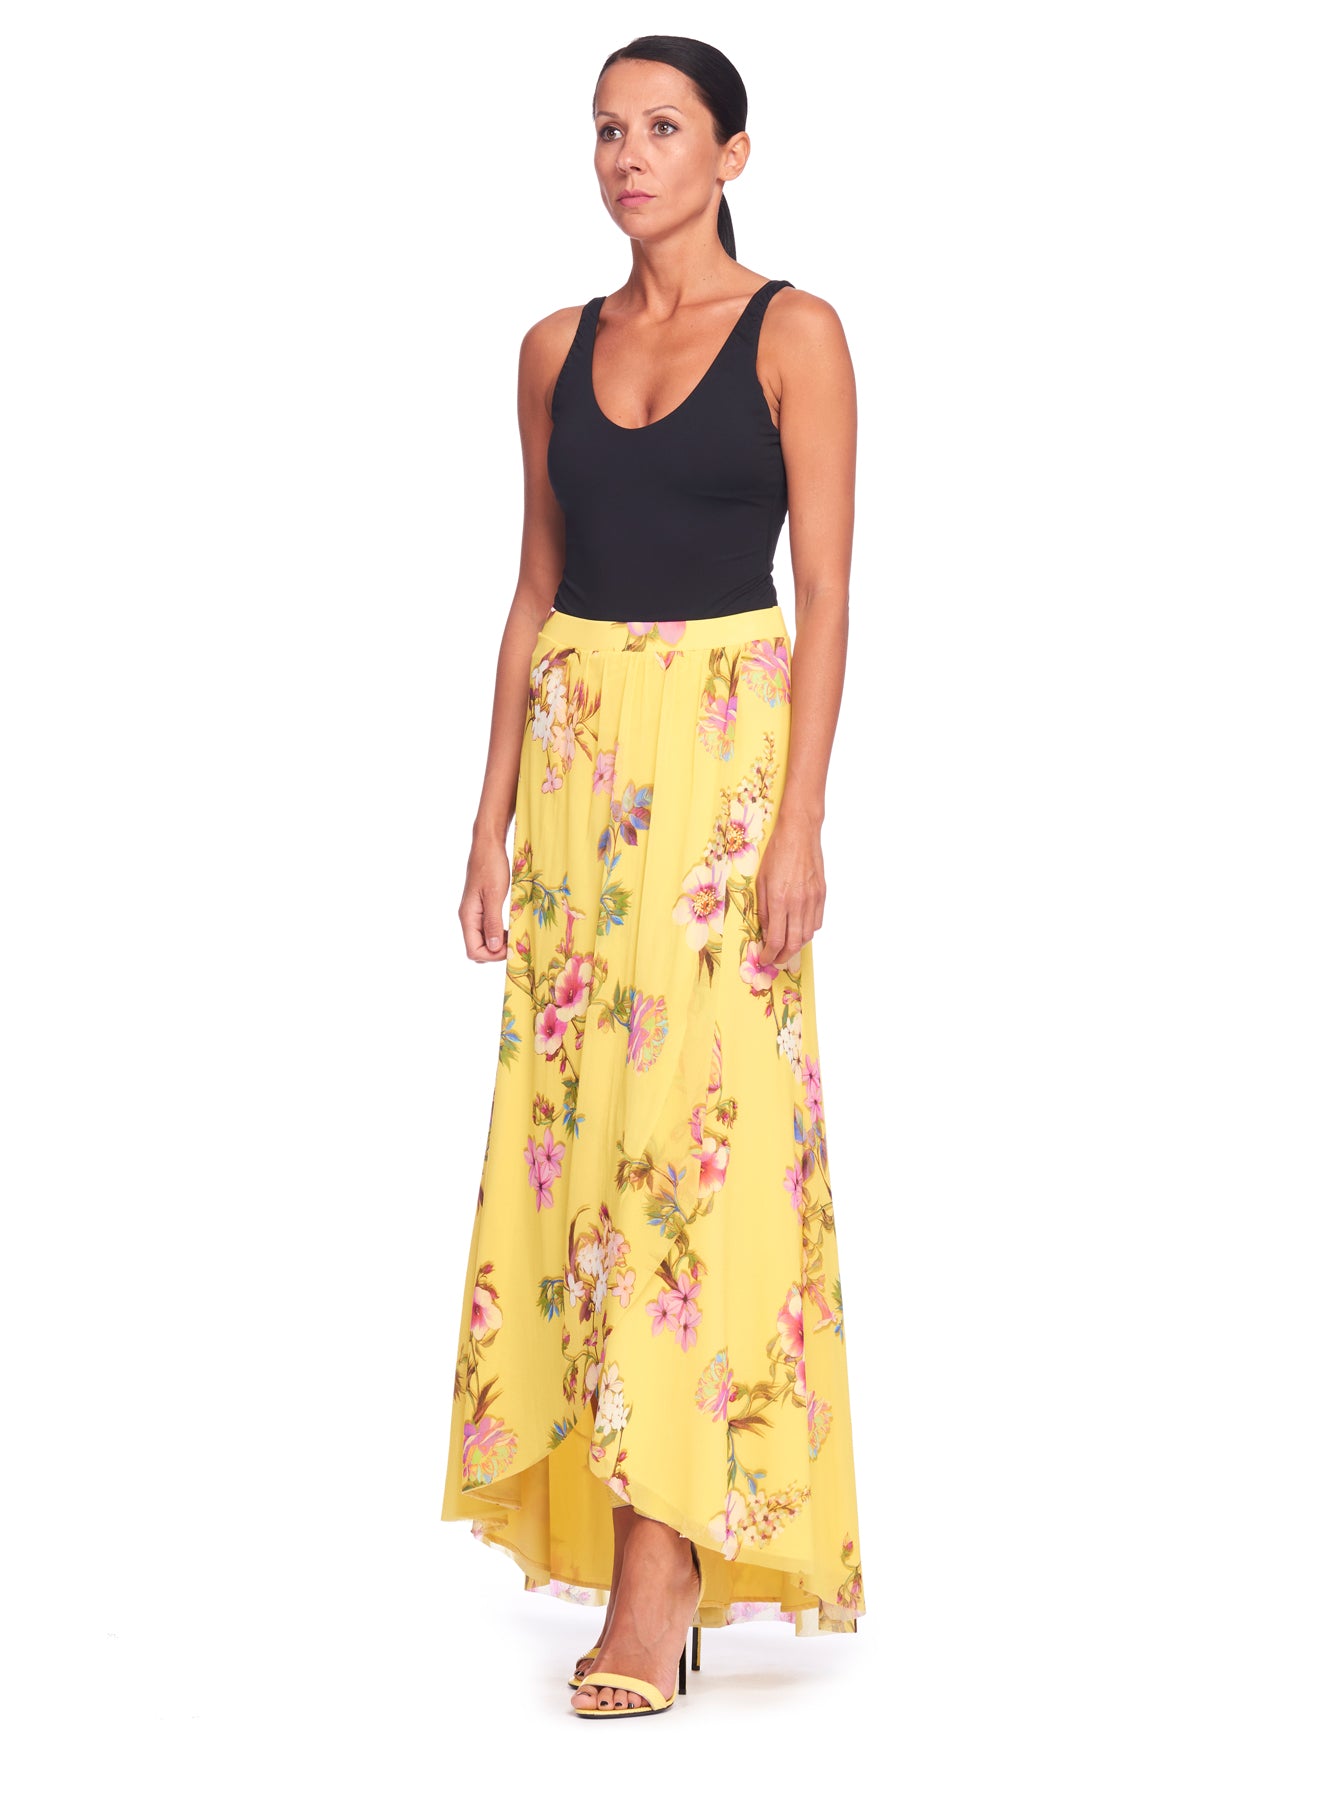 Fuzzi long skirt, mesh fabric, color: Sirio 716. Made in Italy